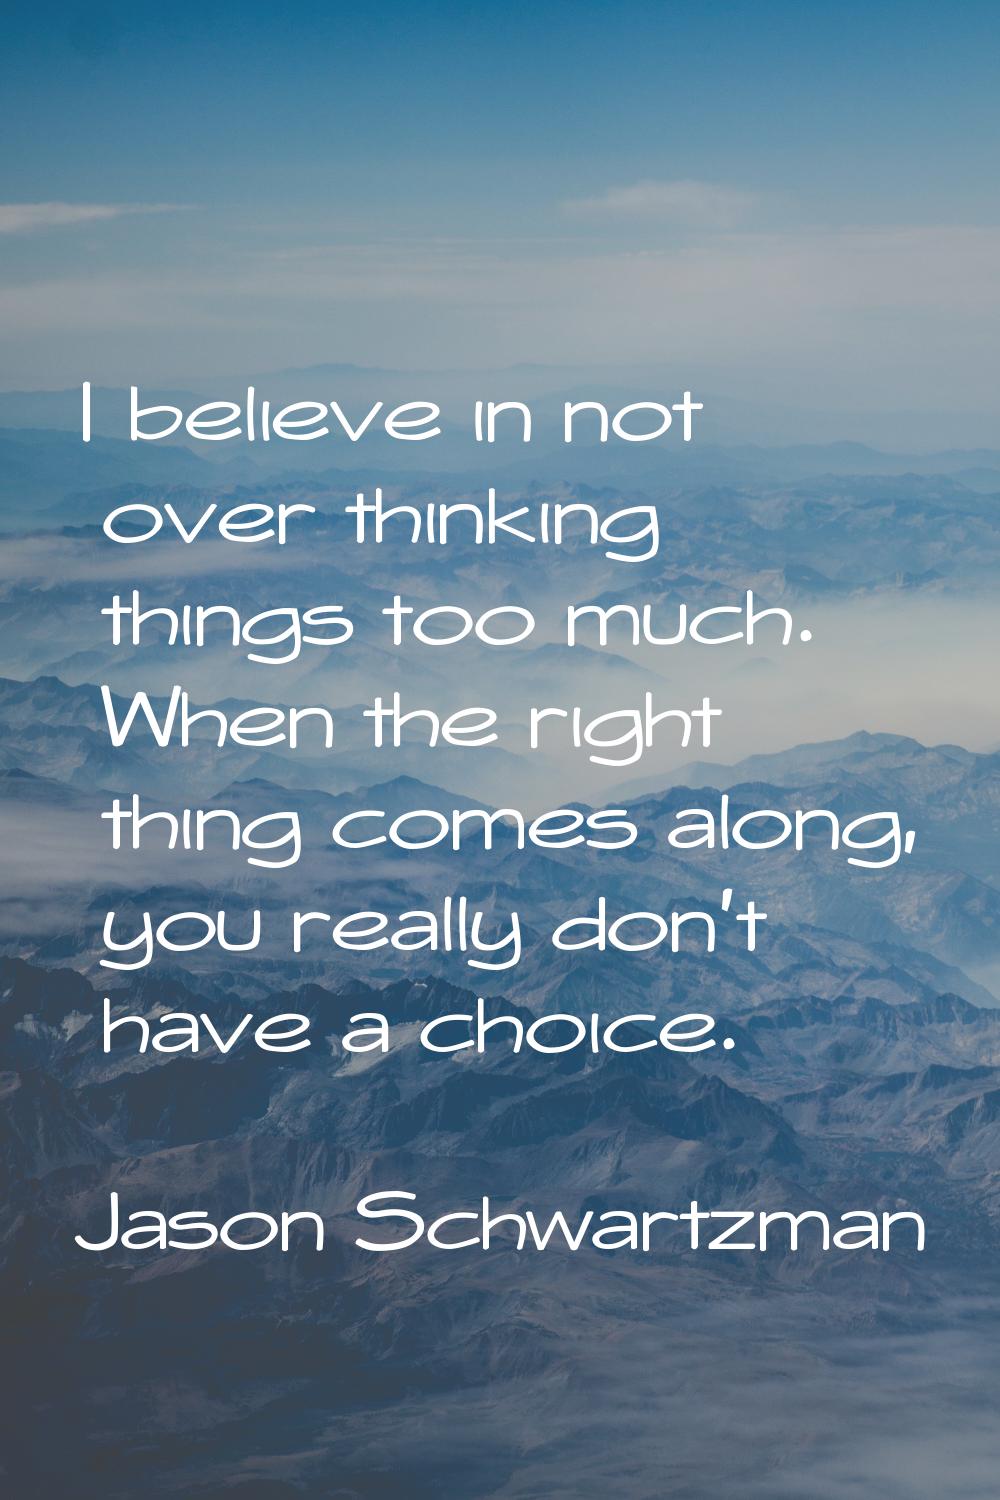 I believe in not over thinking things too much. When the right thing comes along, you really don't 